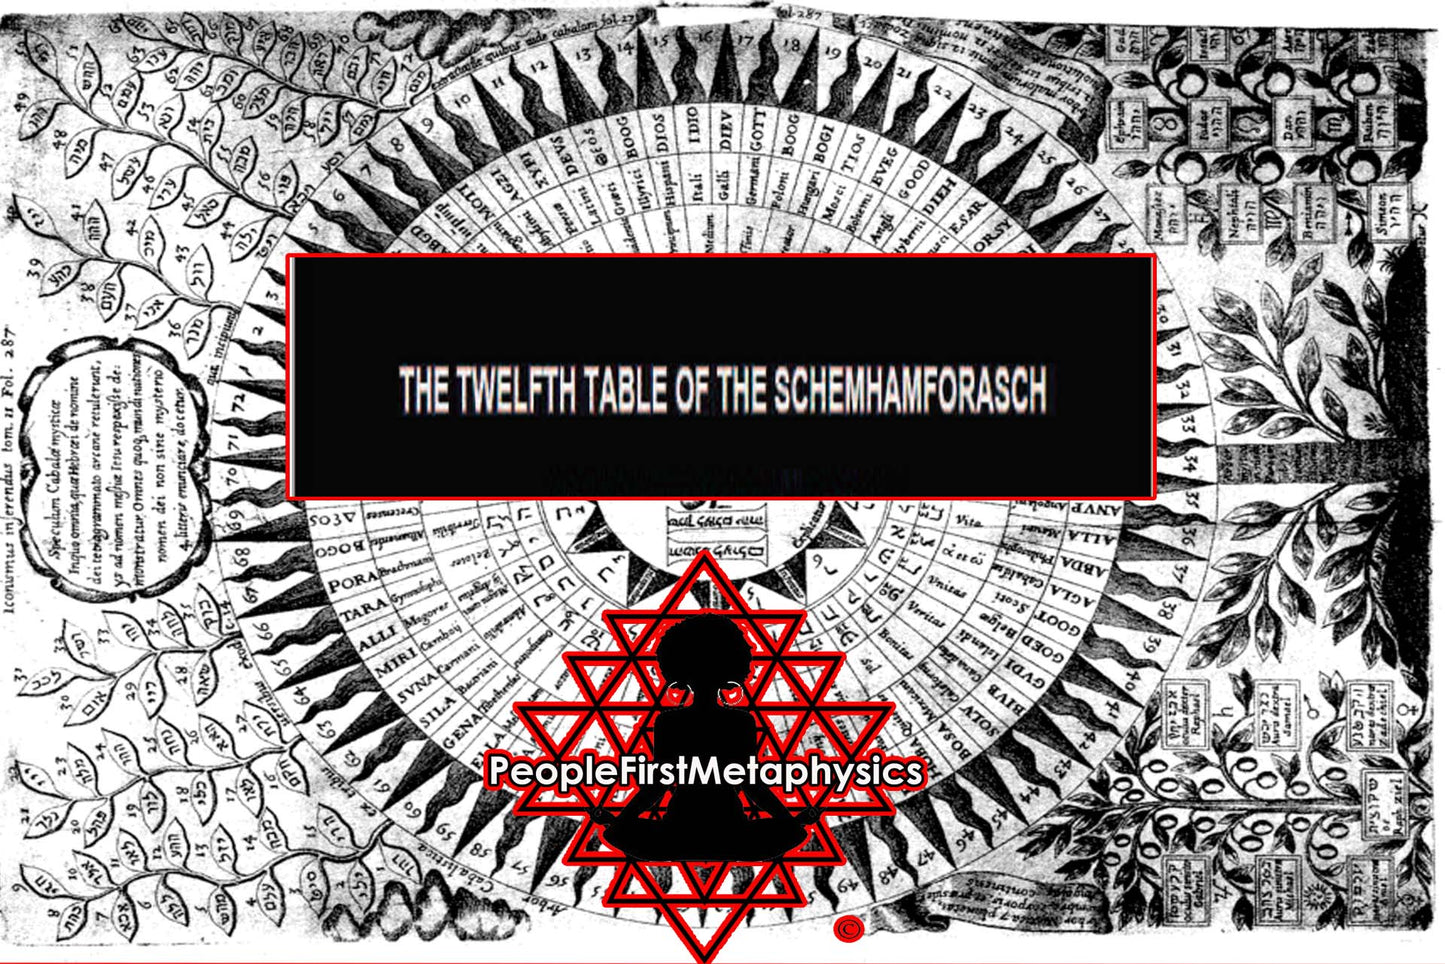 Twelfth Table of The Schemfamforasch from the 6th & 7th Books of Moses #Seals #Moses #Magic #Hebrew #Enochian Magick